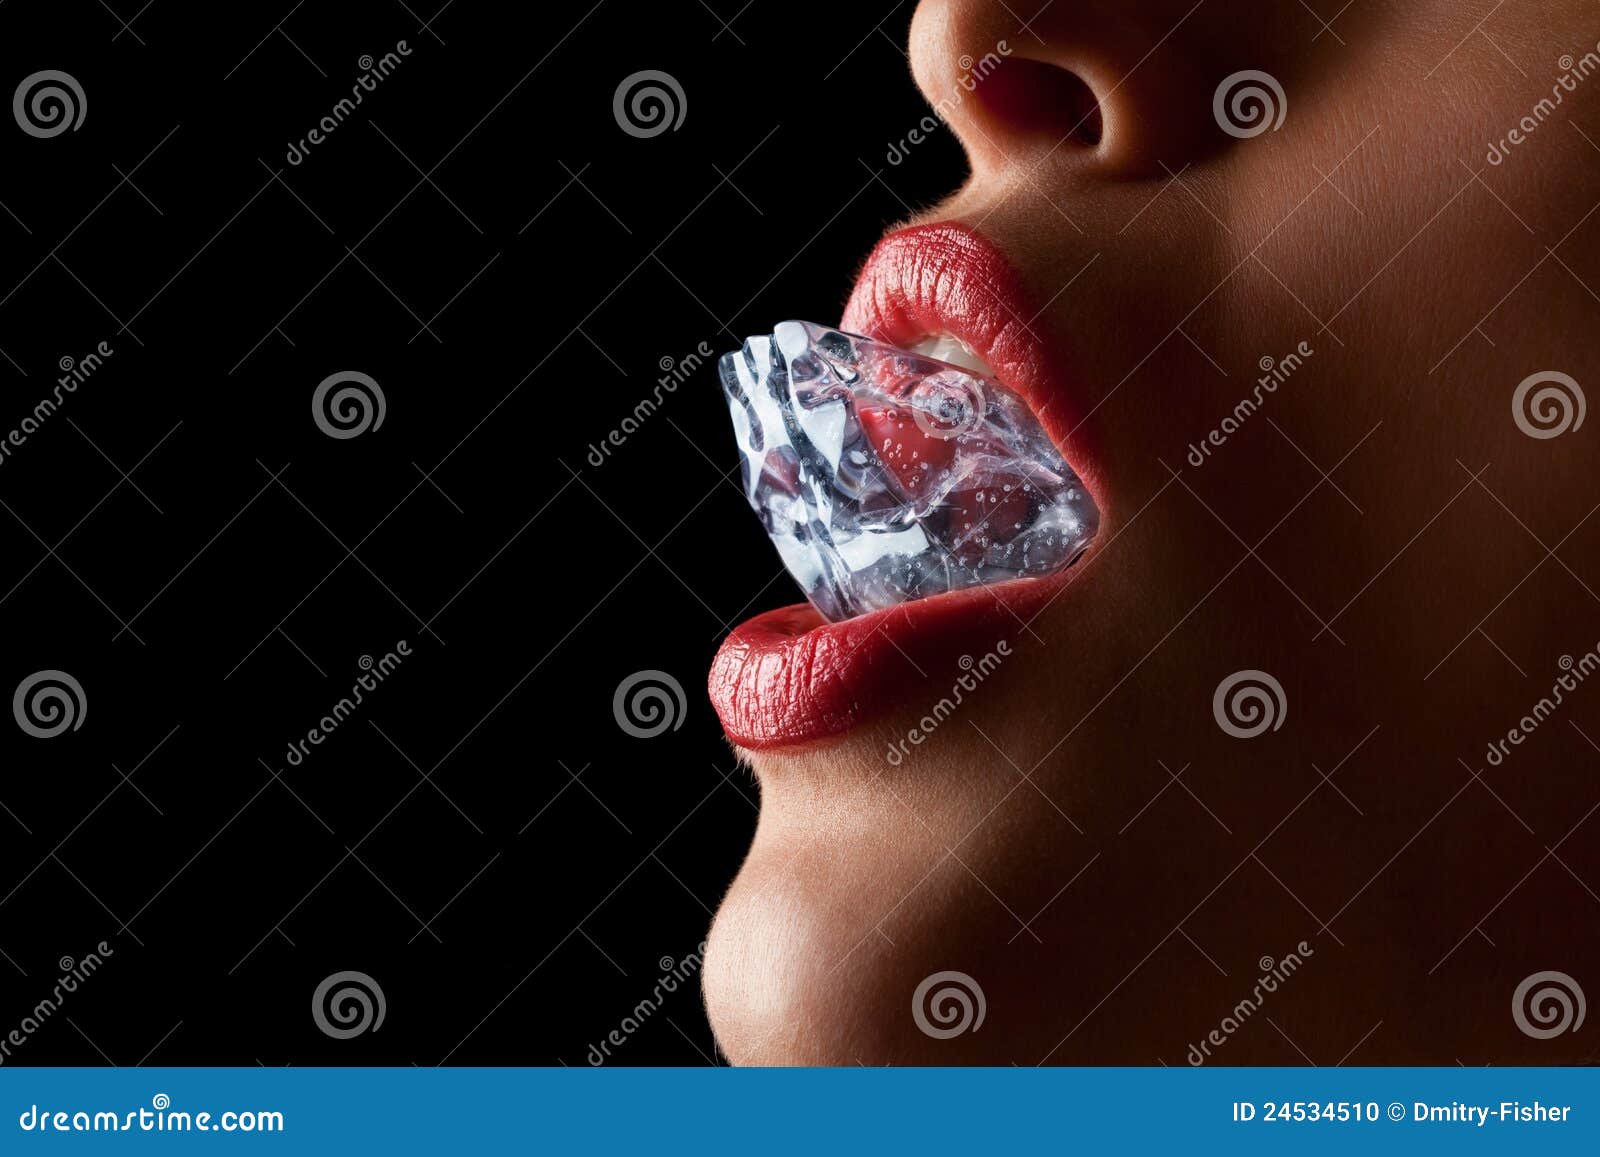 ice cube in woman's mouth.